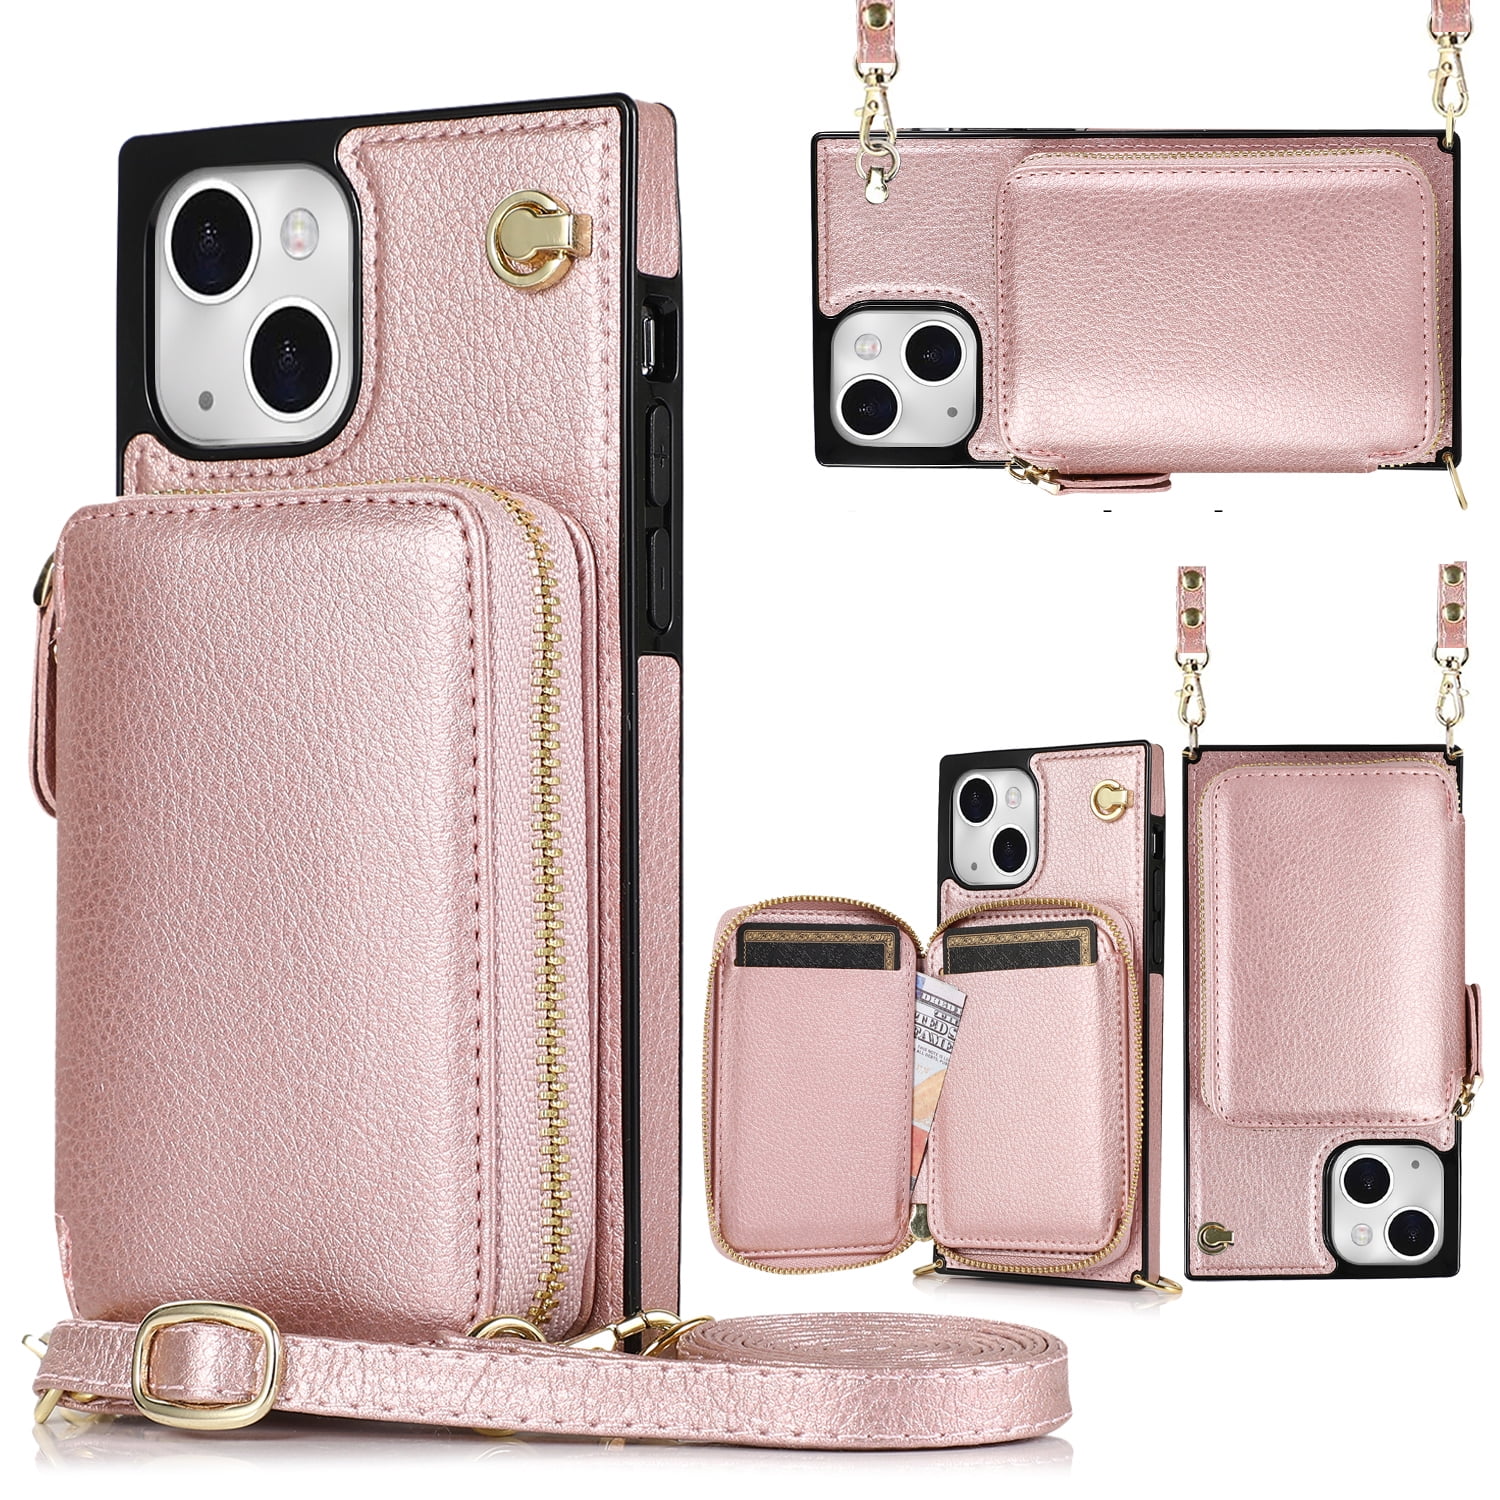 iPhone 13 Pro Max Wallet Case with Crossbody Strap, Dteck Zipper